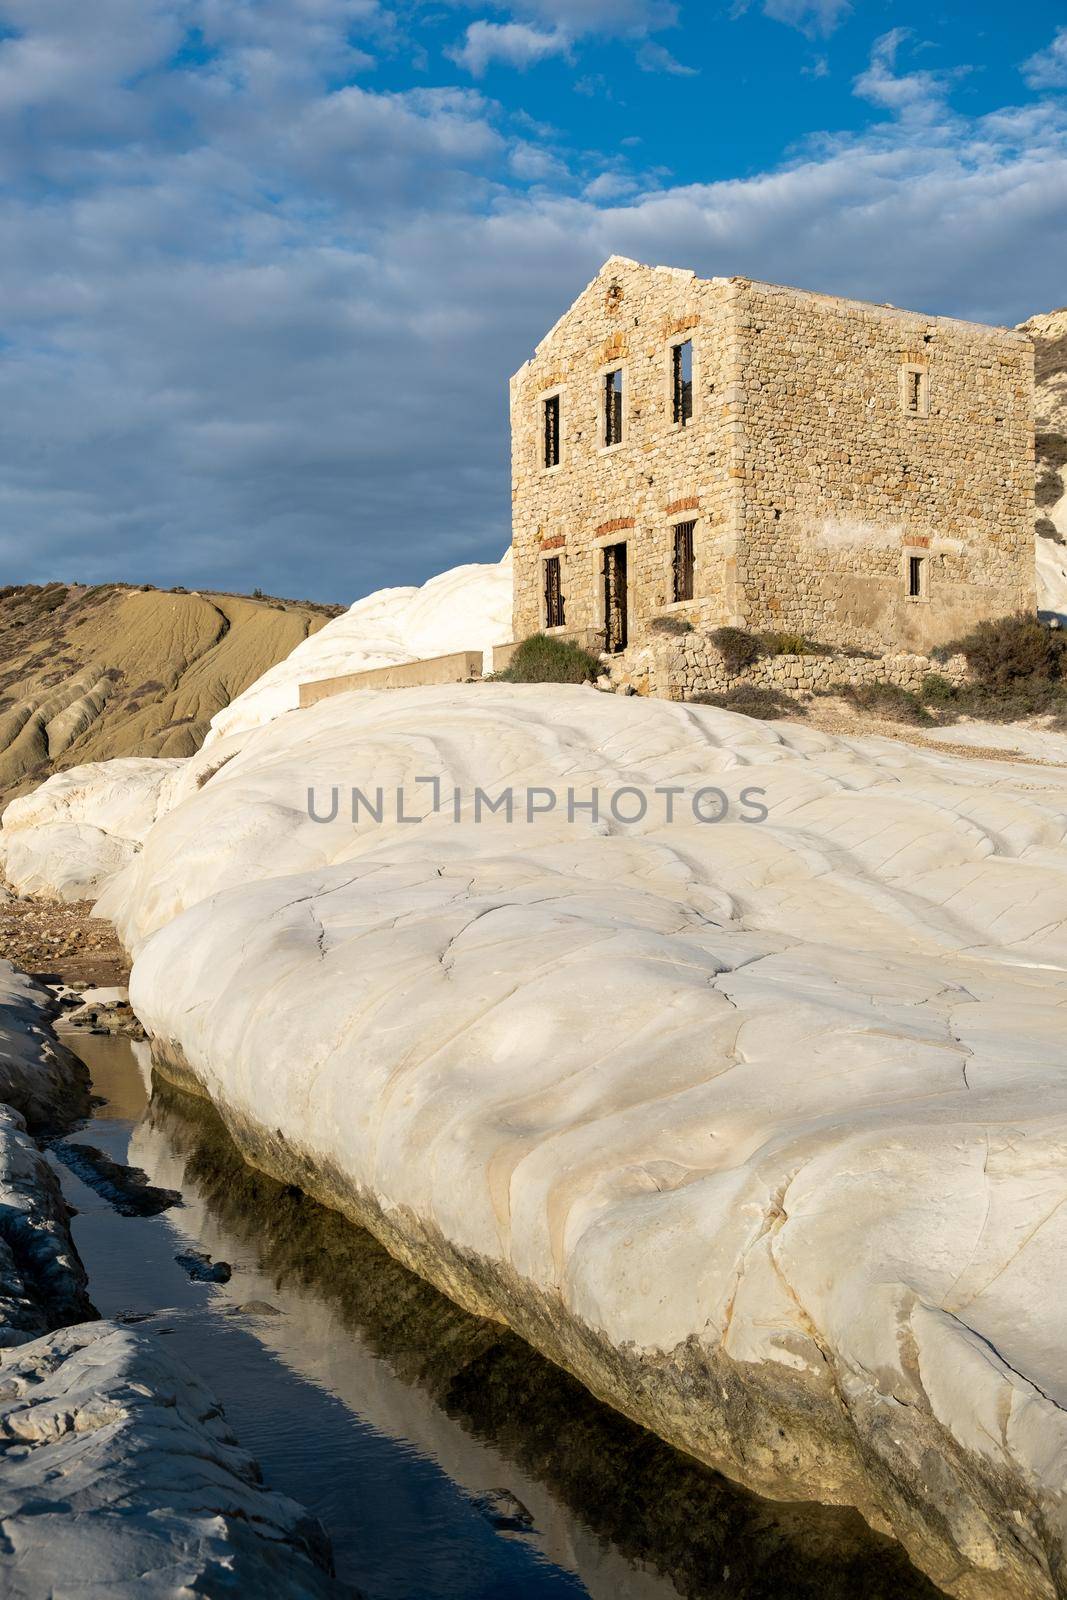 Punta Bianca, Agrigento in Sicily Italy White beach with old ruins of abandoned stone house on white cliffs by fokkebok